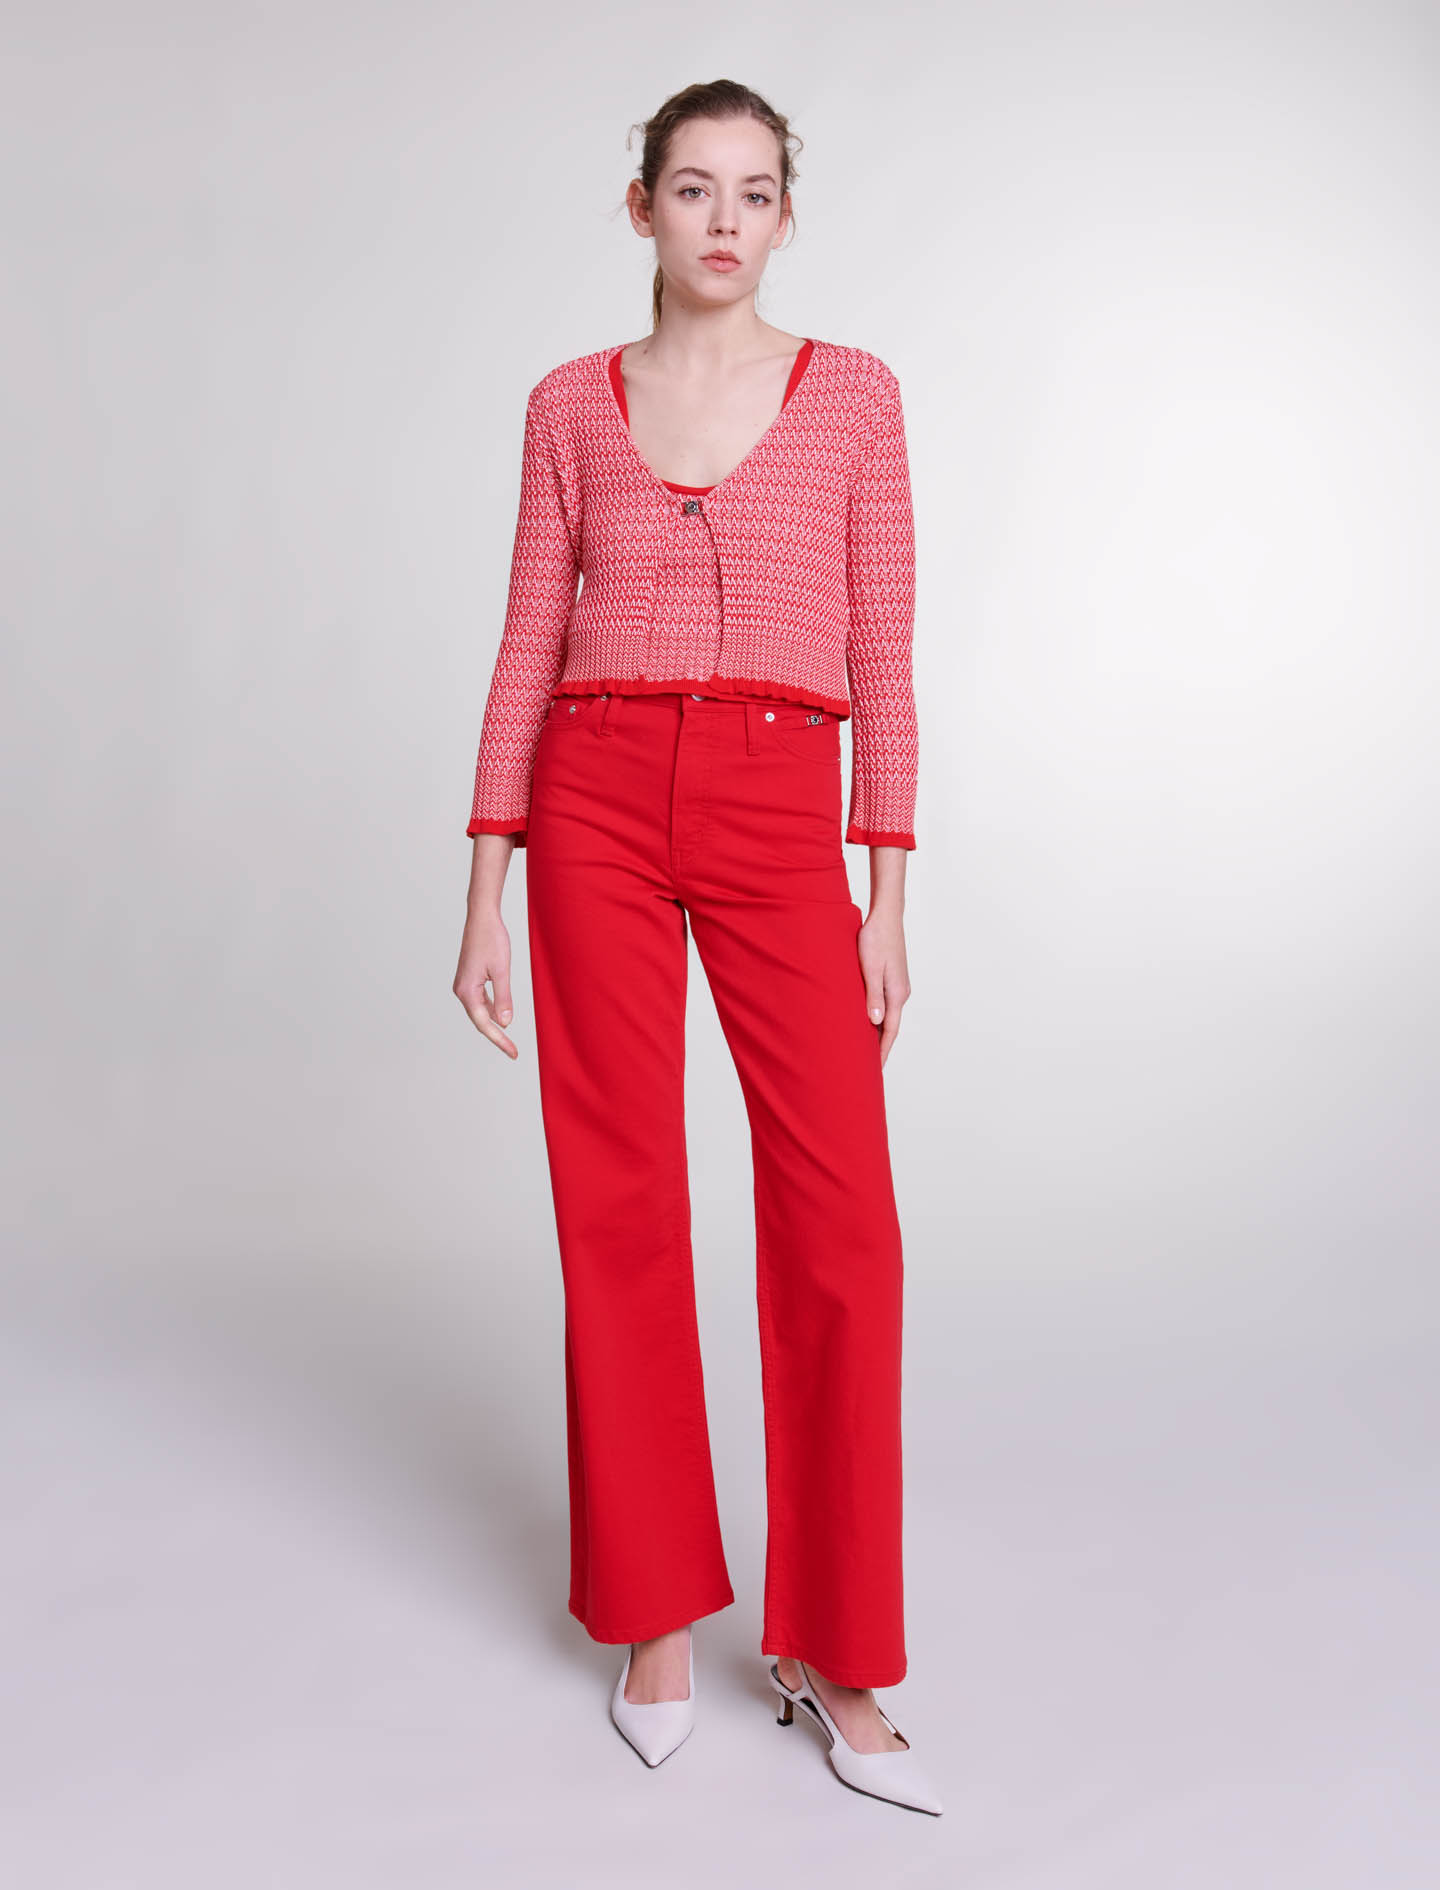 Maje Woman's viscose, Herringbone knit twin set for Spring/Summer, in color Red / Red